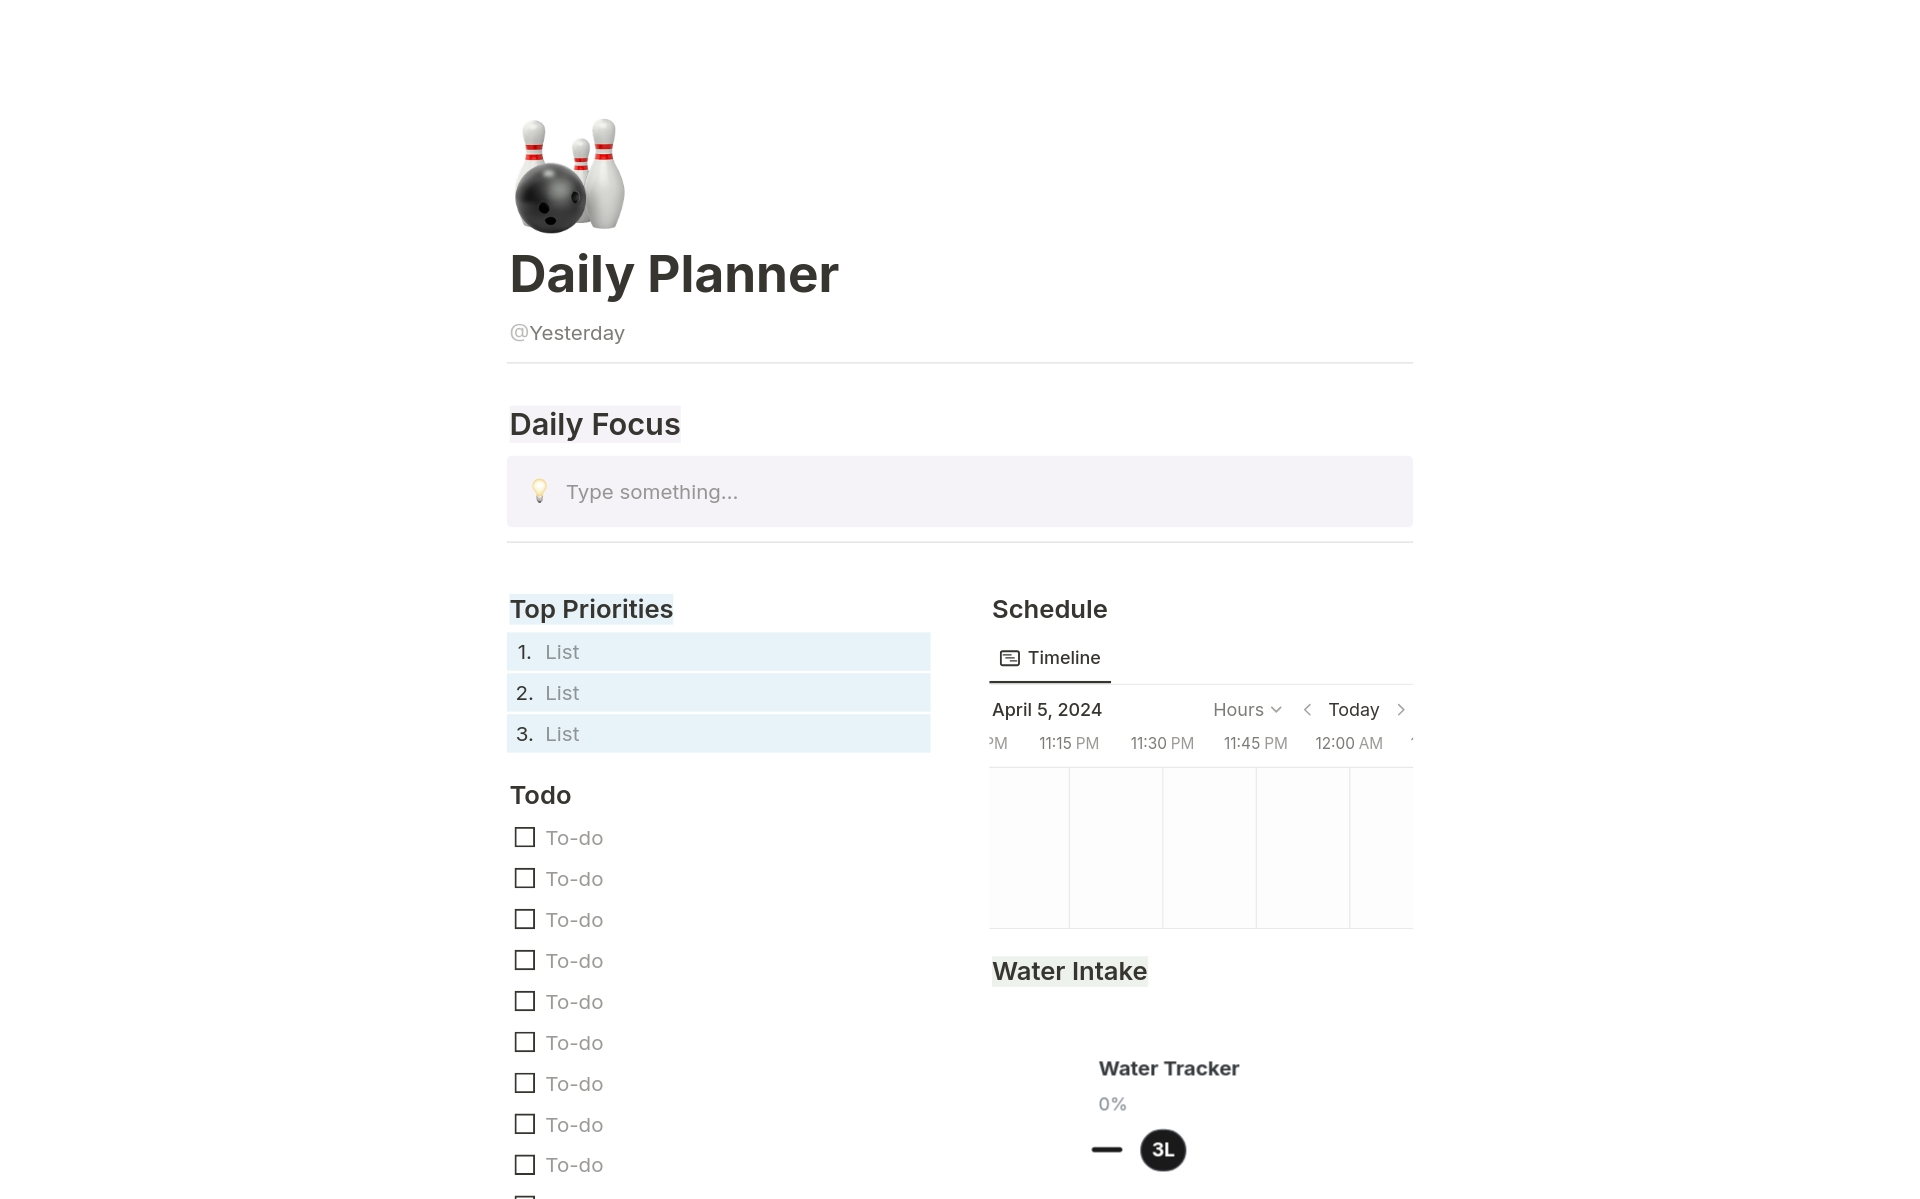 Elevate your daily planning and productivity with the Daily Planner. Designed for individuals who seek to streamline their day-to-day activities, this planner focuses on clarity, simplicity, and effectiveness.